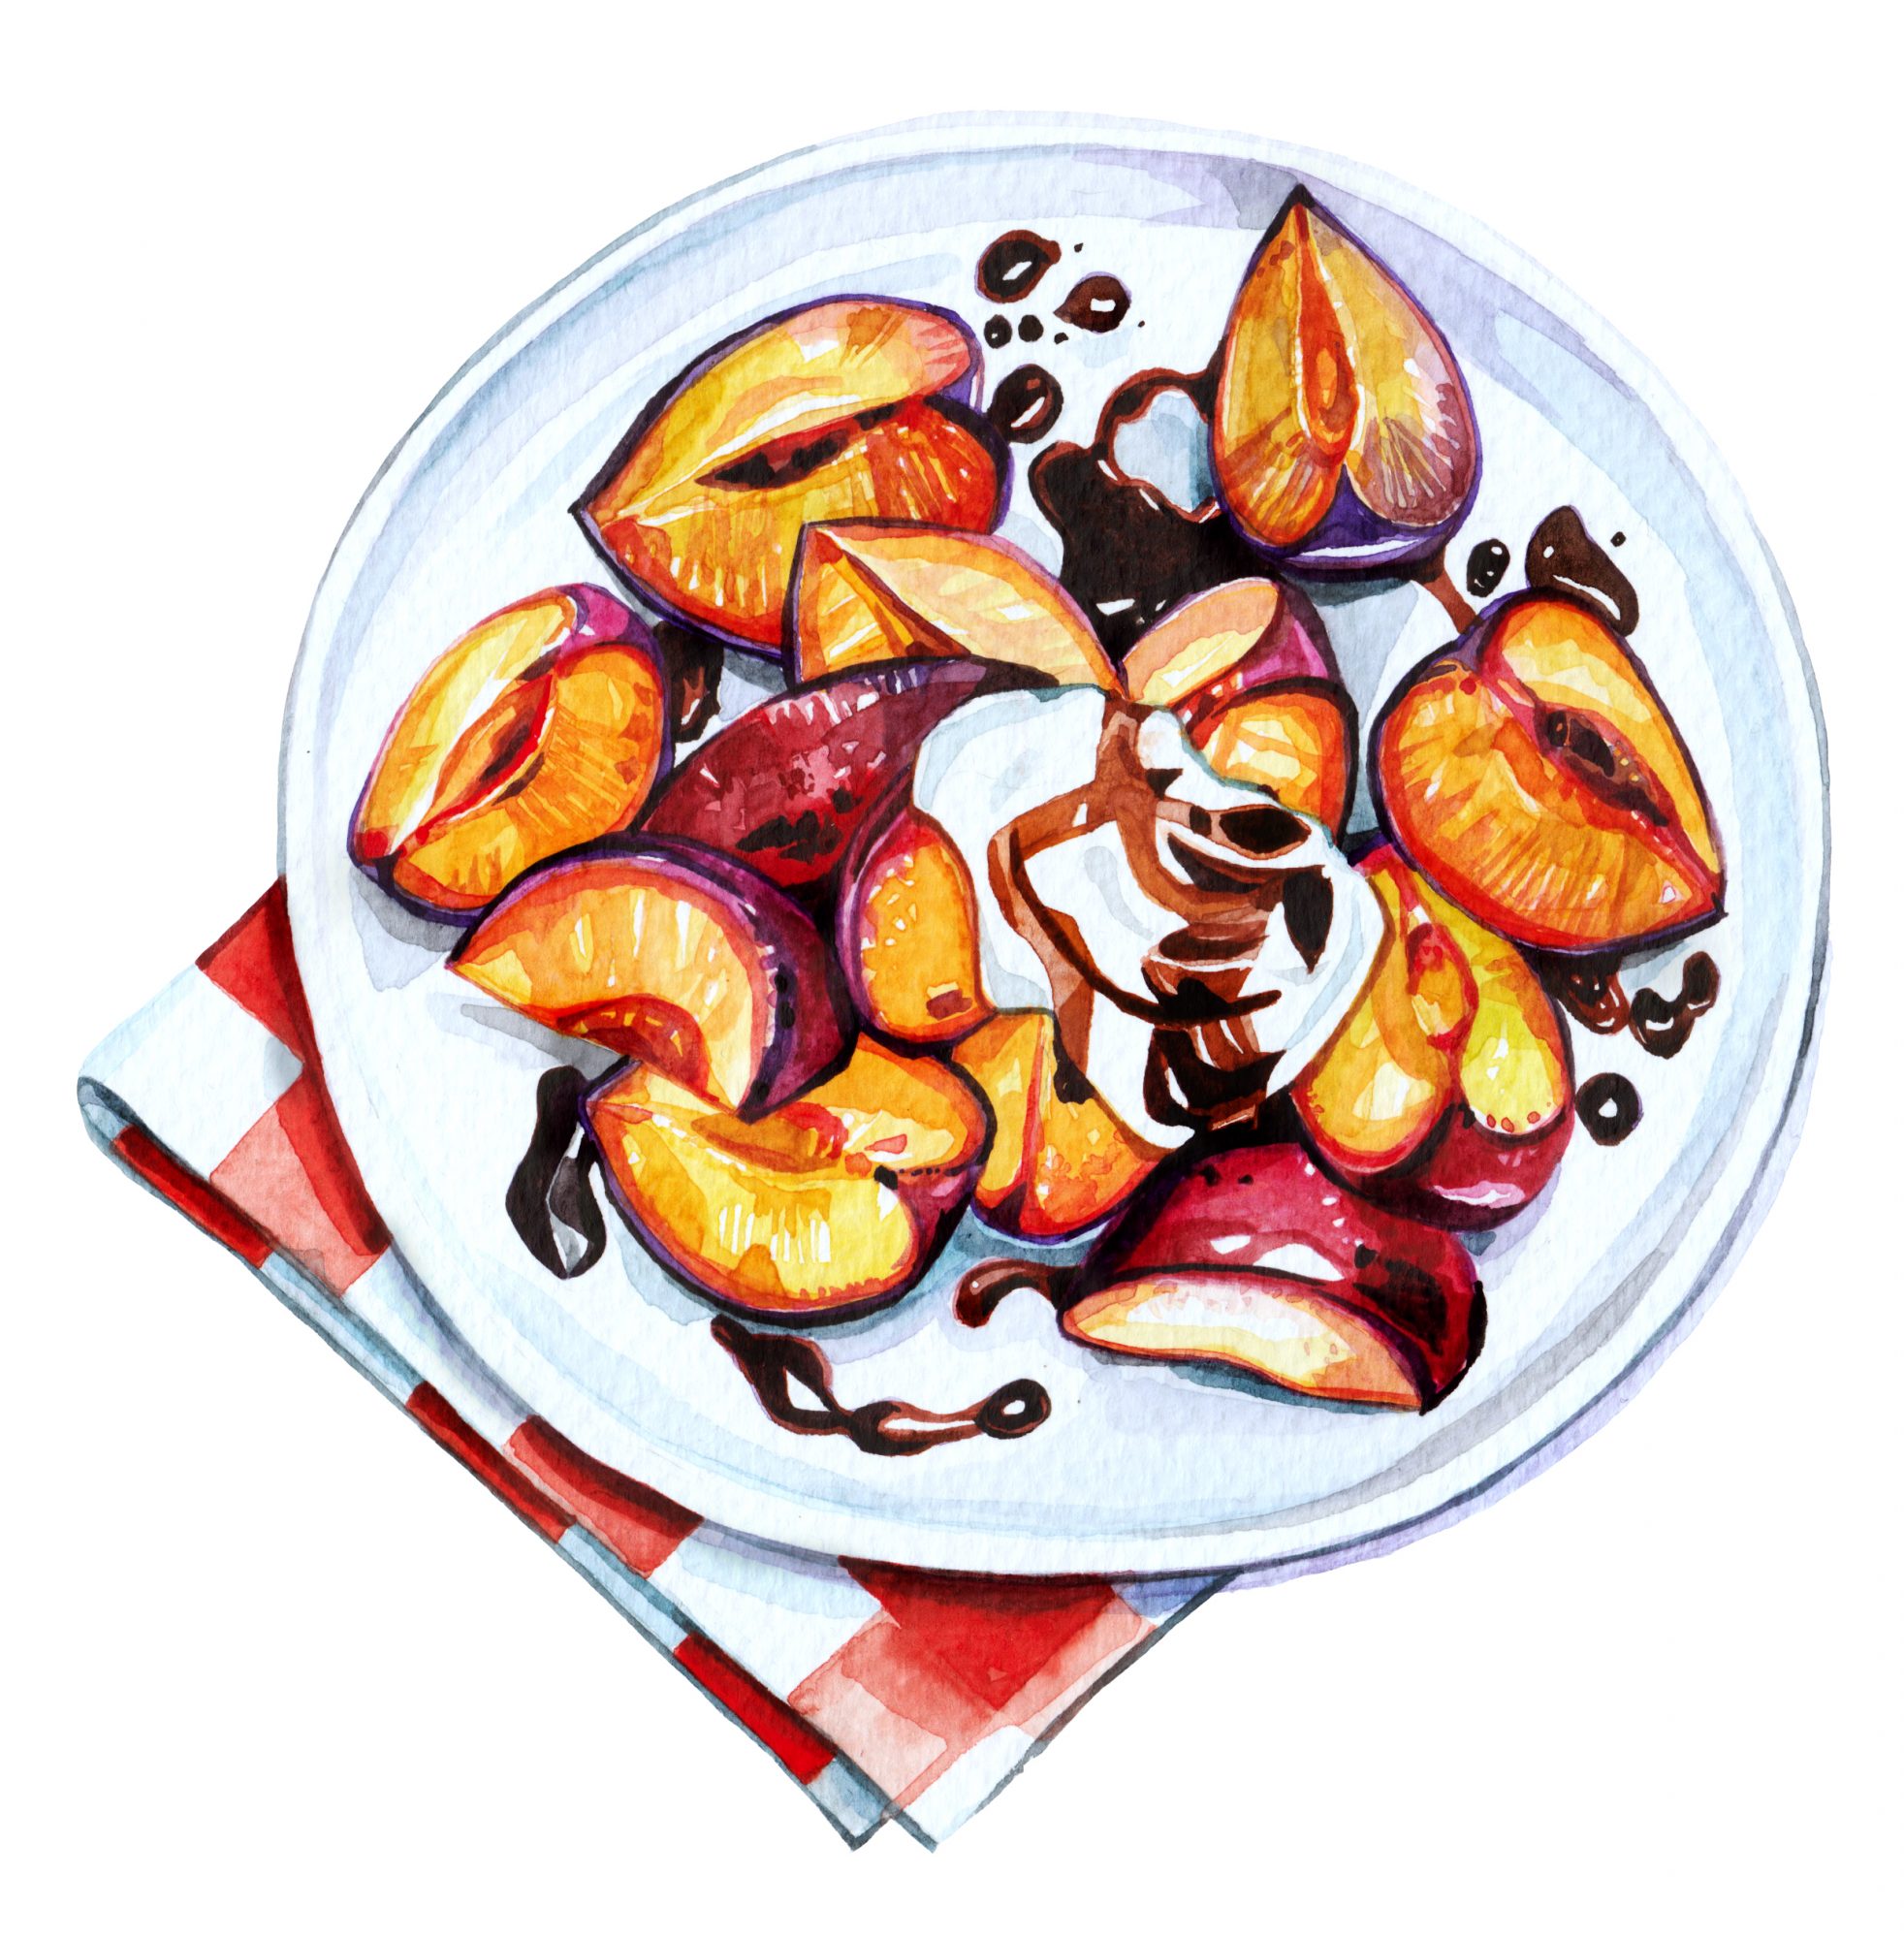 Balsamic Glazed and Roasted Plums 